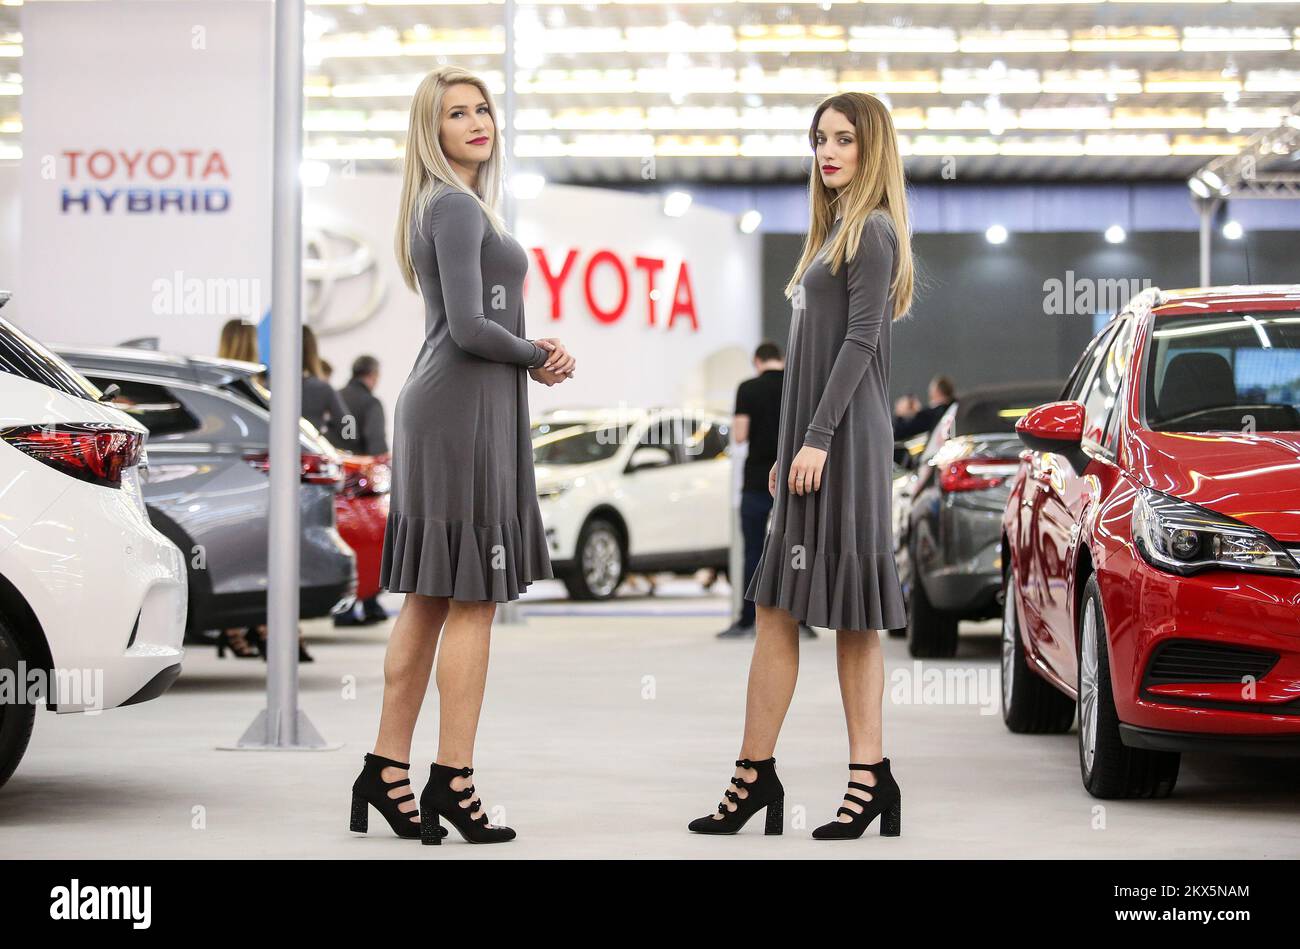 10.04.2018., Zagreb Fair, Zagreb, Croatia - Press day at Zagreb fair before official opening of Zagreb Auto Show. Zagreb Auto Show is an exhibition of automobiles, motorcycles and supporting industry. Leading national and international companies present in numerous pavilions and a large outdoor area the novelties in the automobile and moto industry. Premiere shows of new models, concept vehicles, top-design exhibition spaces, daily entertainment programmes with lots of good music and fun are just a part of the unrepeatable atmosphere of the salon and make Zagreb Auto Show the leading trade fai Stock Photo